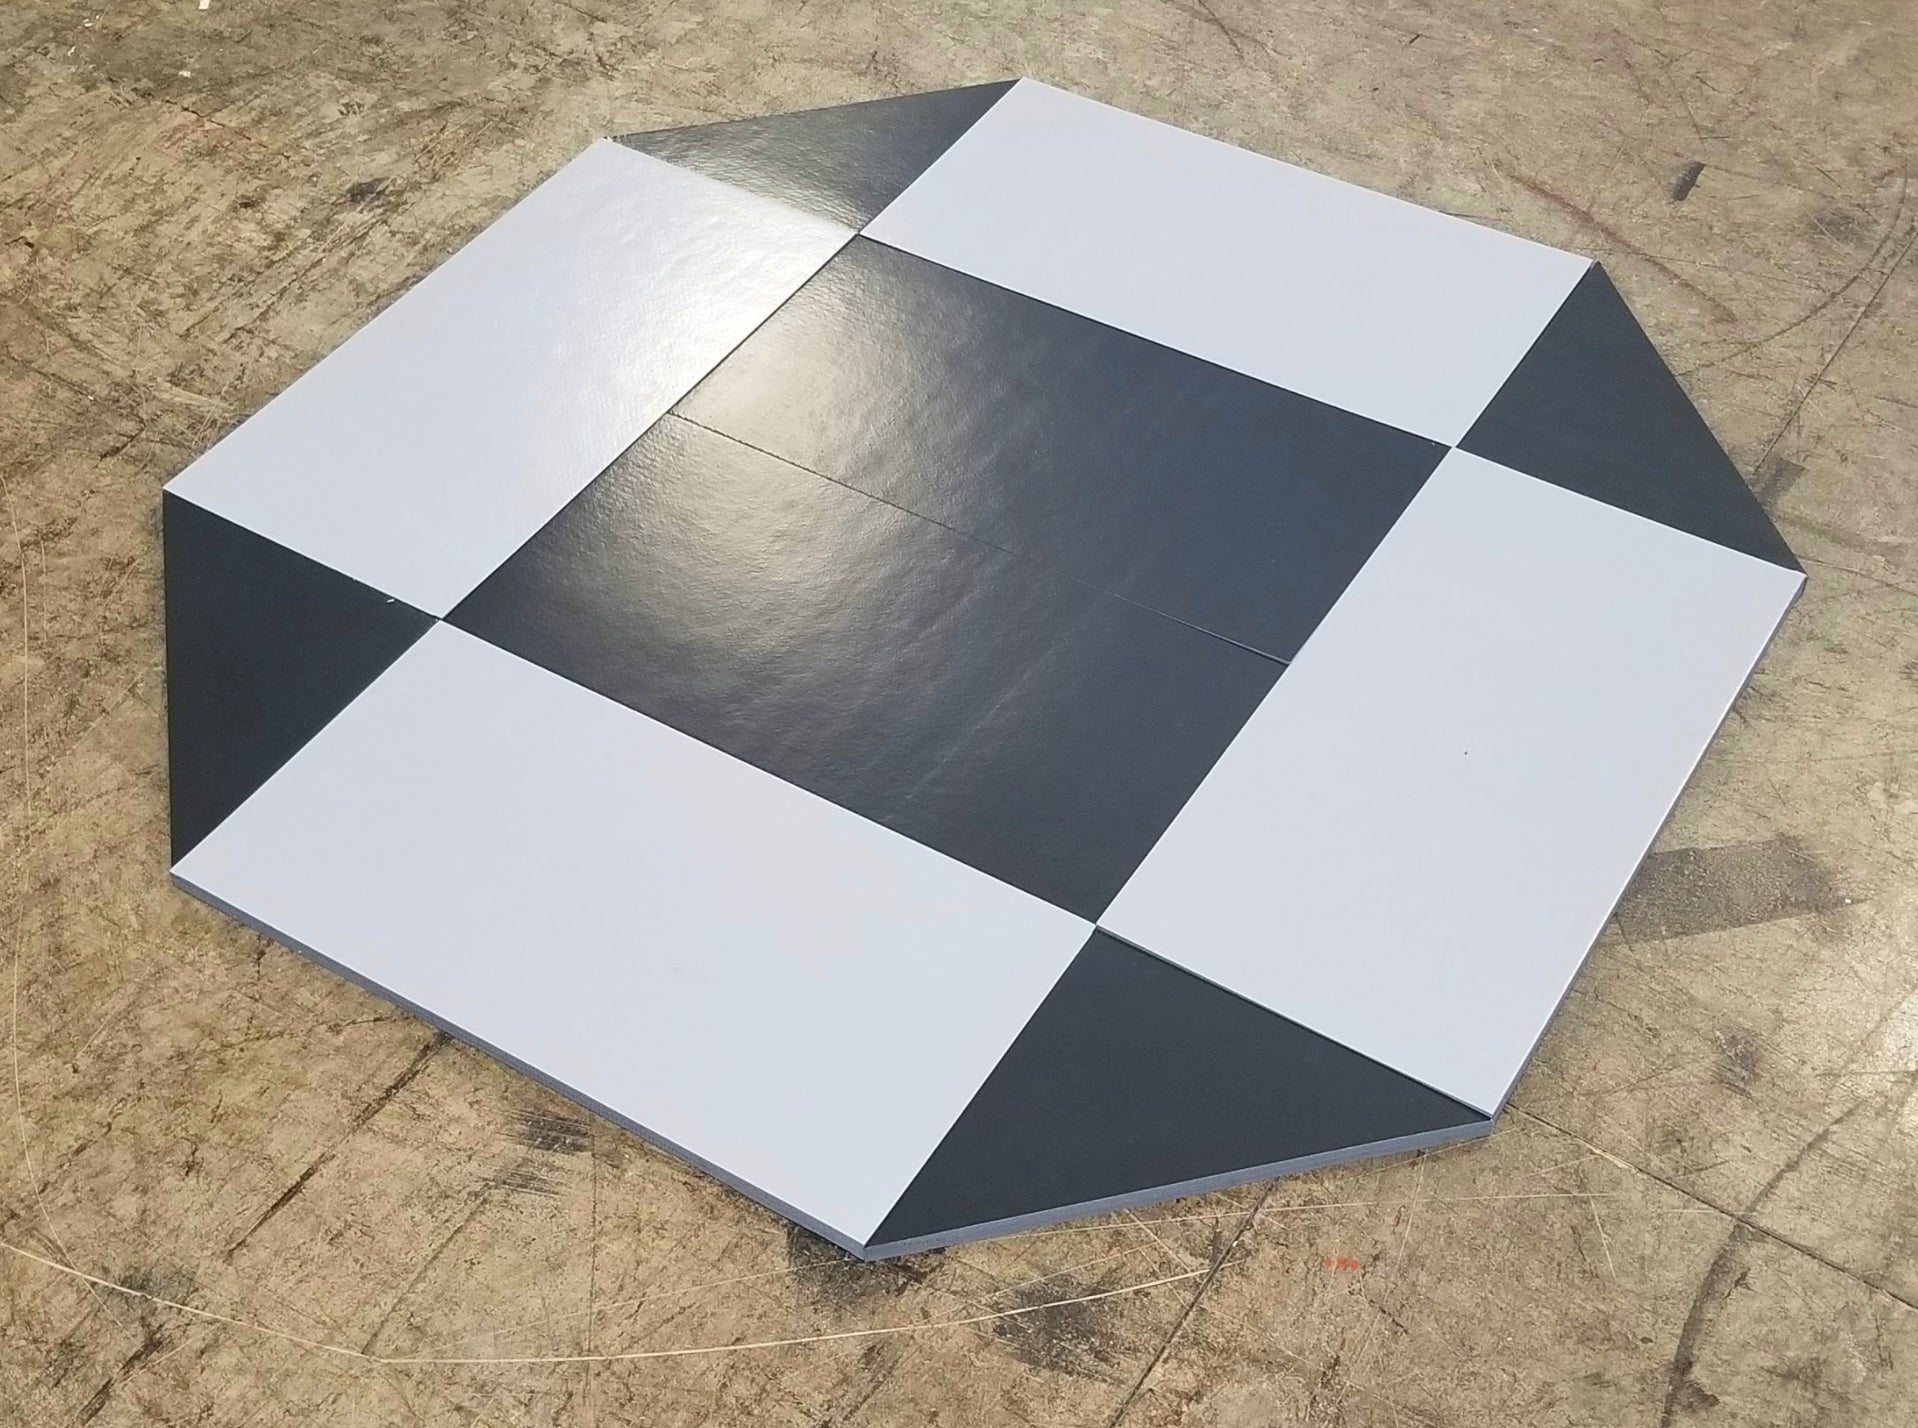 8' x 8' remnant octagon wrestling mat Black and Gray